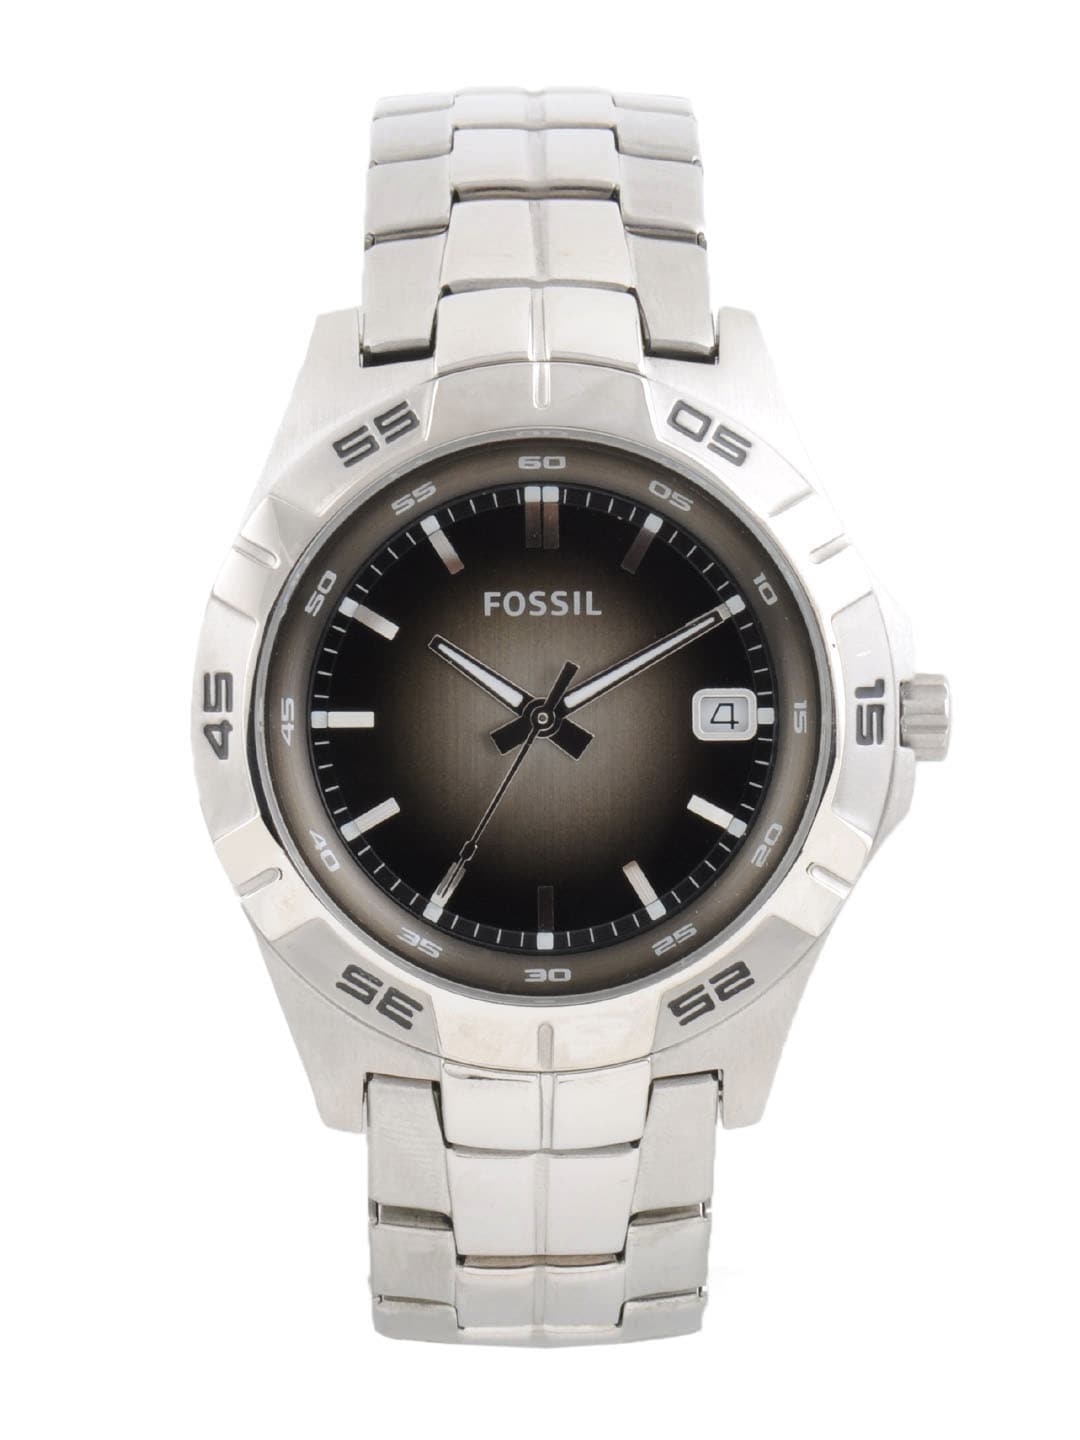 Fossil Men Black Dial Analogue Watch AM4381